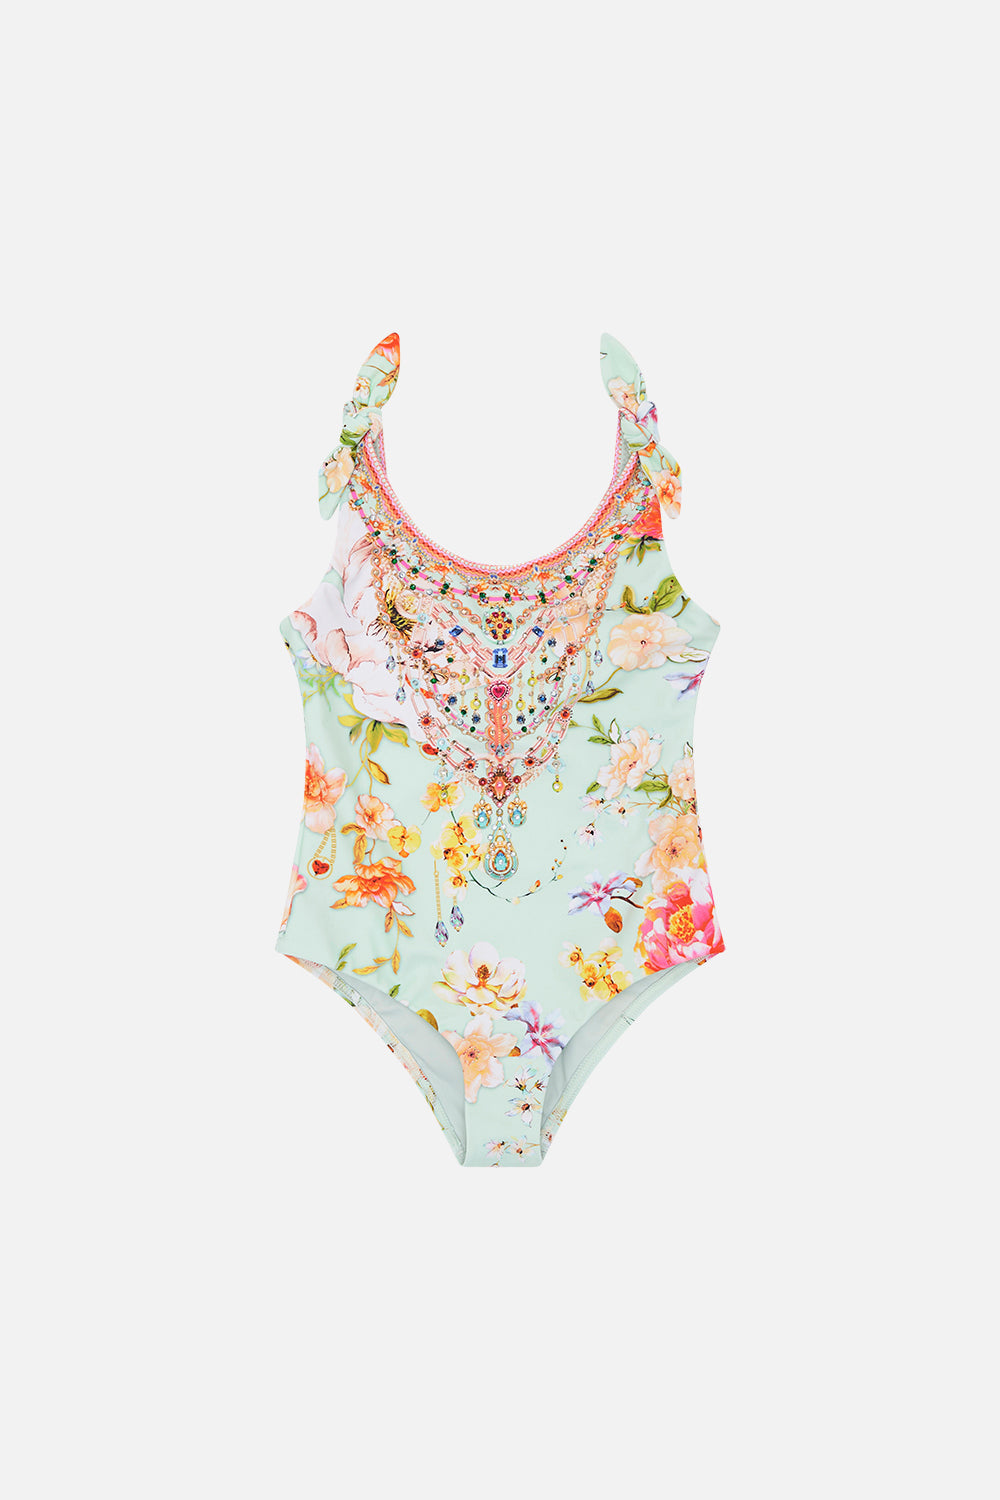 Product view of MILLA By CAMILLA one piece swimsuit in Talk The Walk print